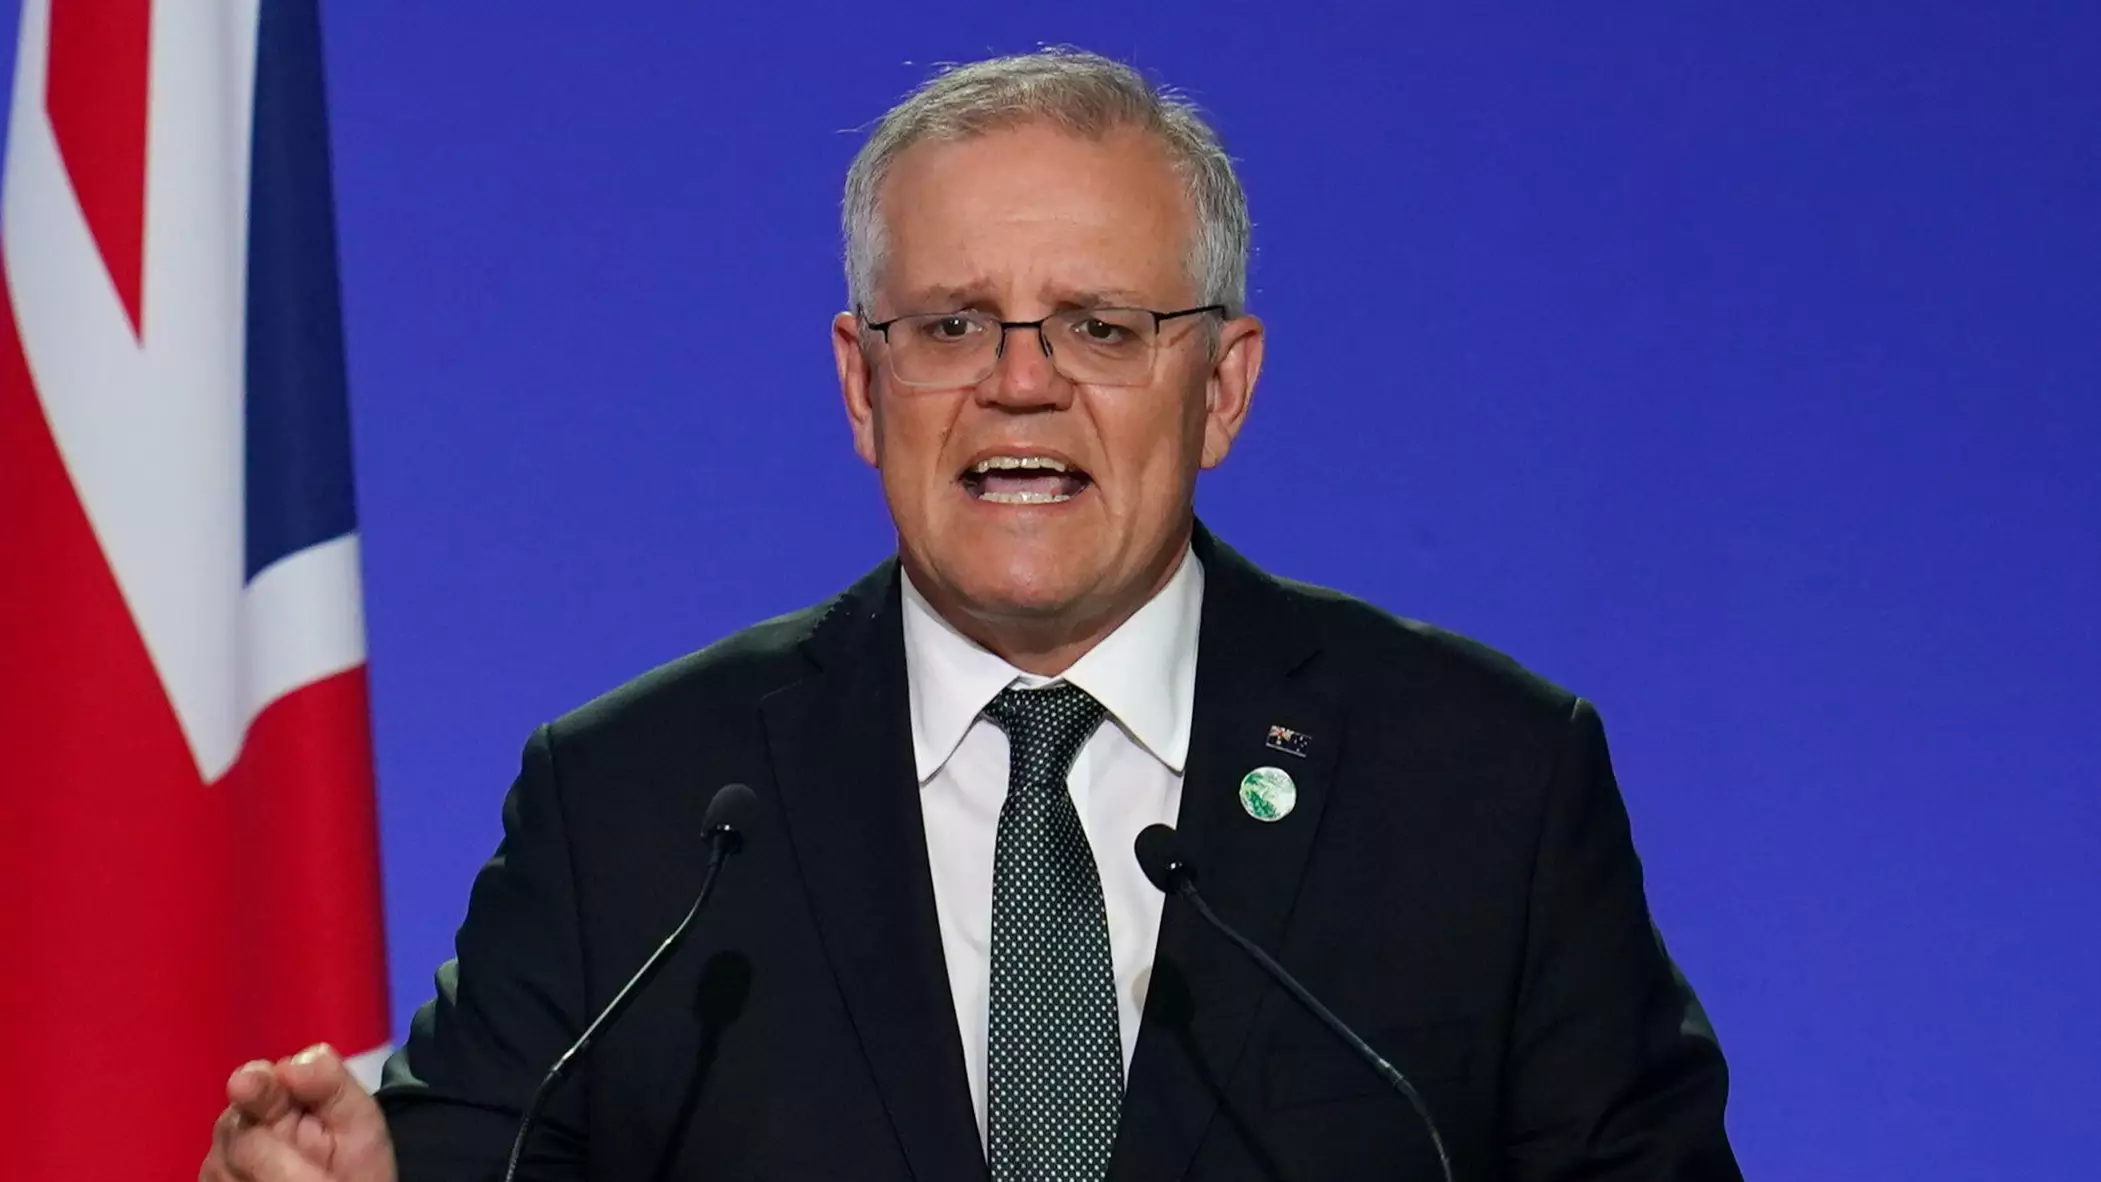 Scott Morrison Urges States To Crack On With Reopening Plans Amid Omicron Variant